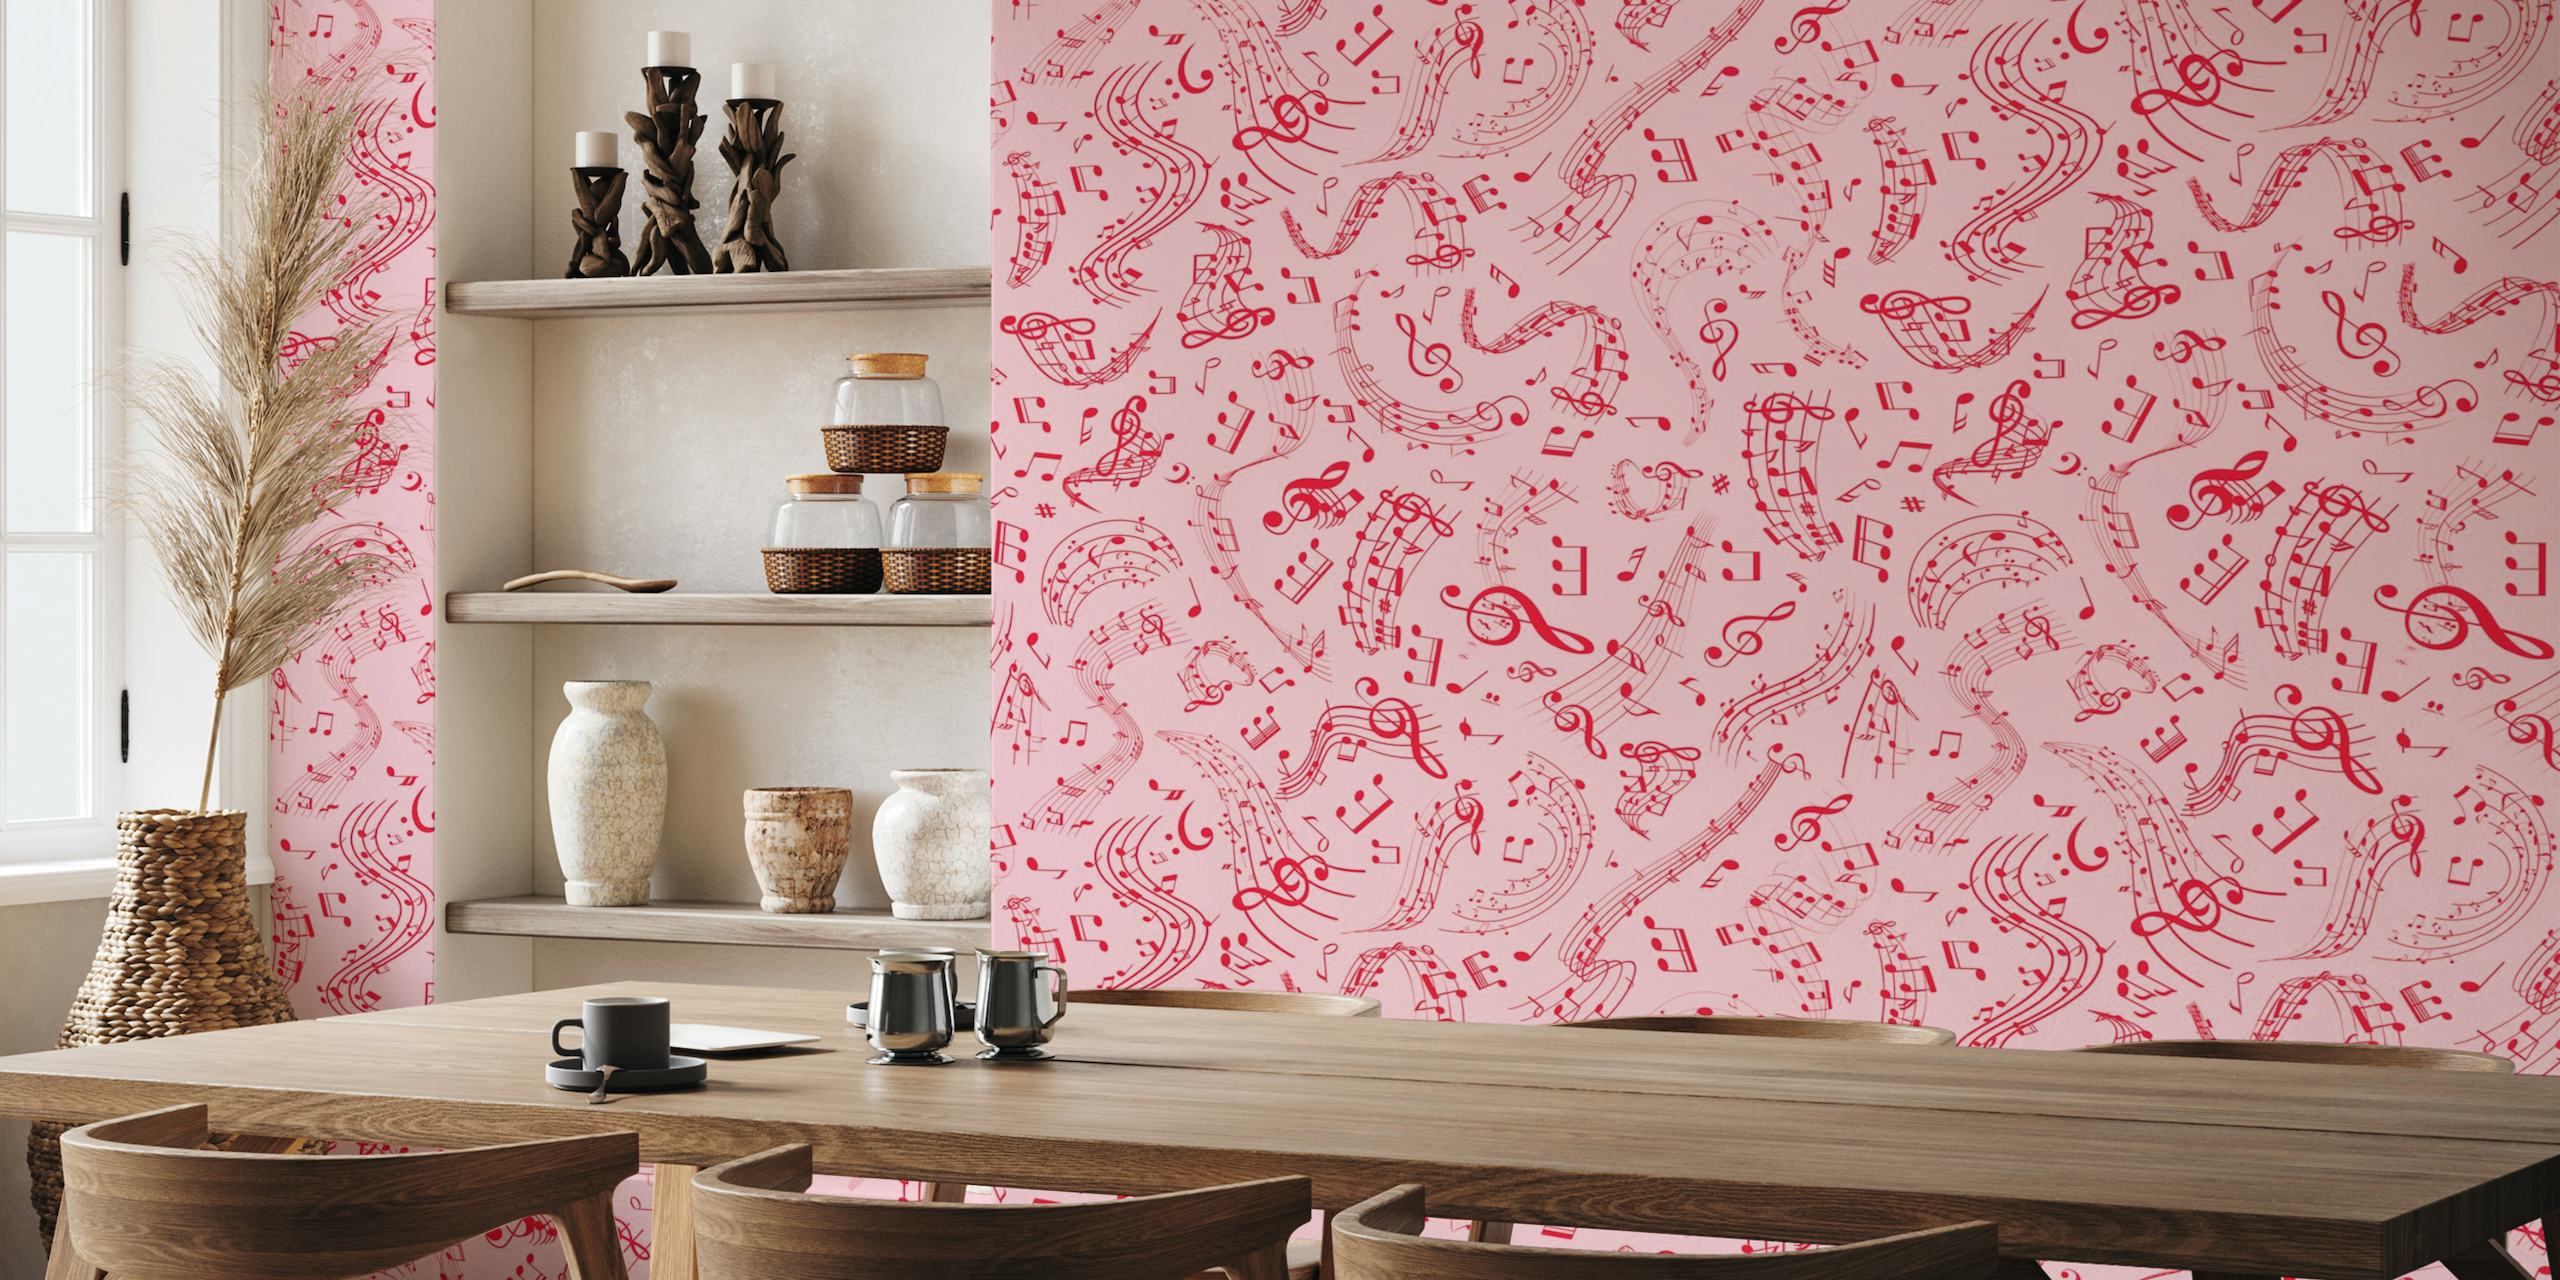 Music Notes 10 Crimson Red on Bubble Gum Pink wallpaper